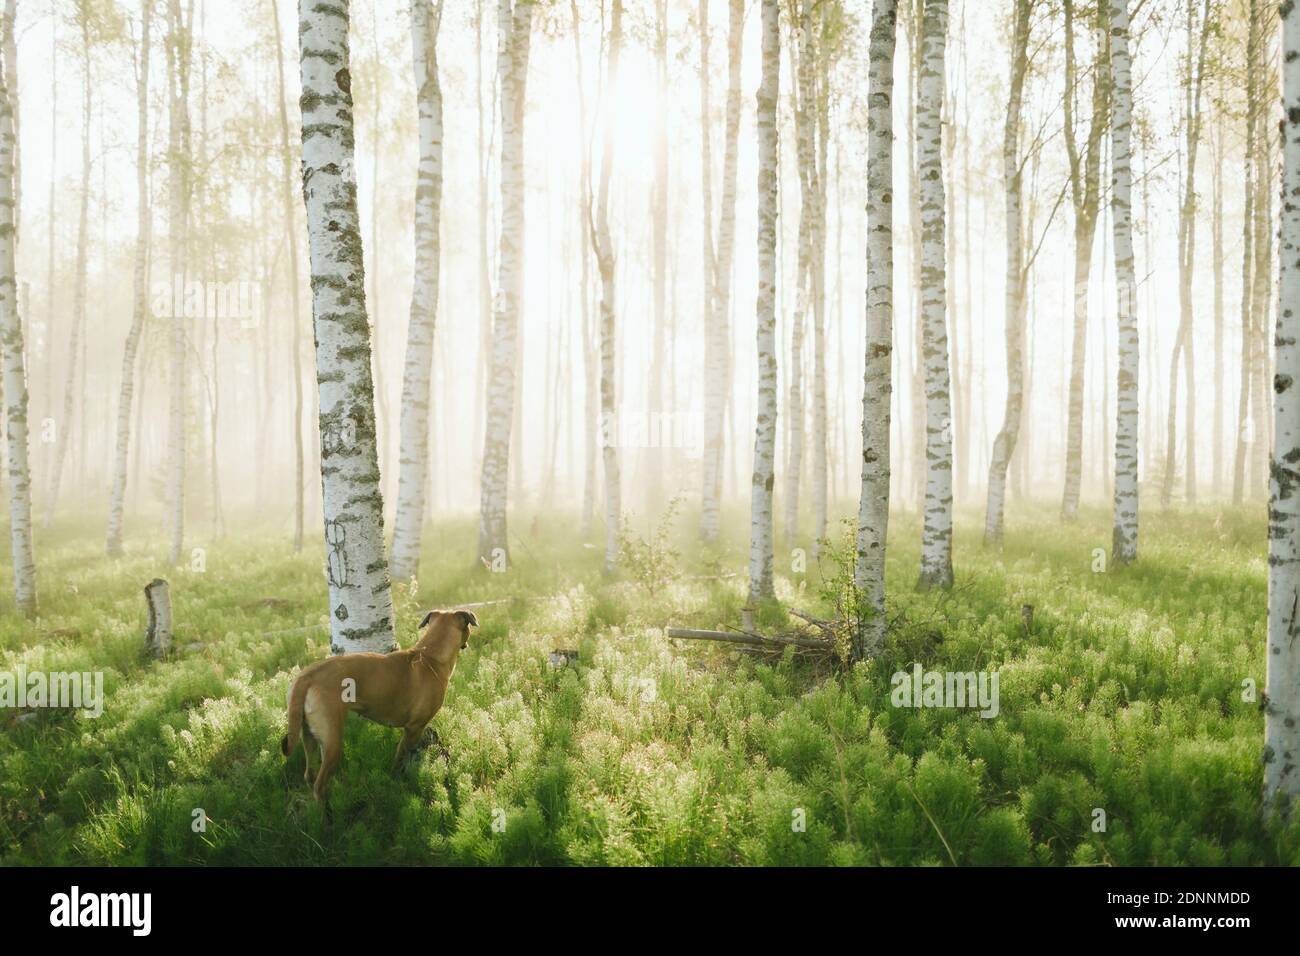 Dog in birch forest Stock Photo